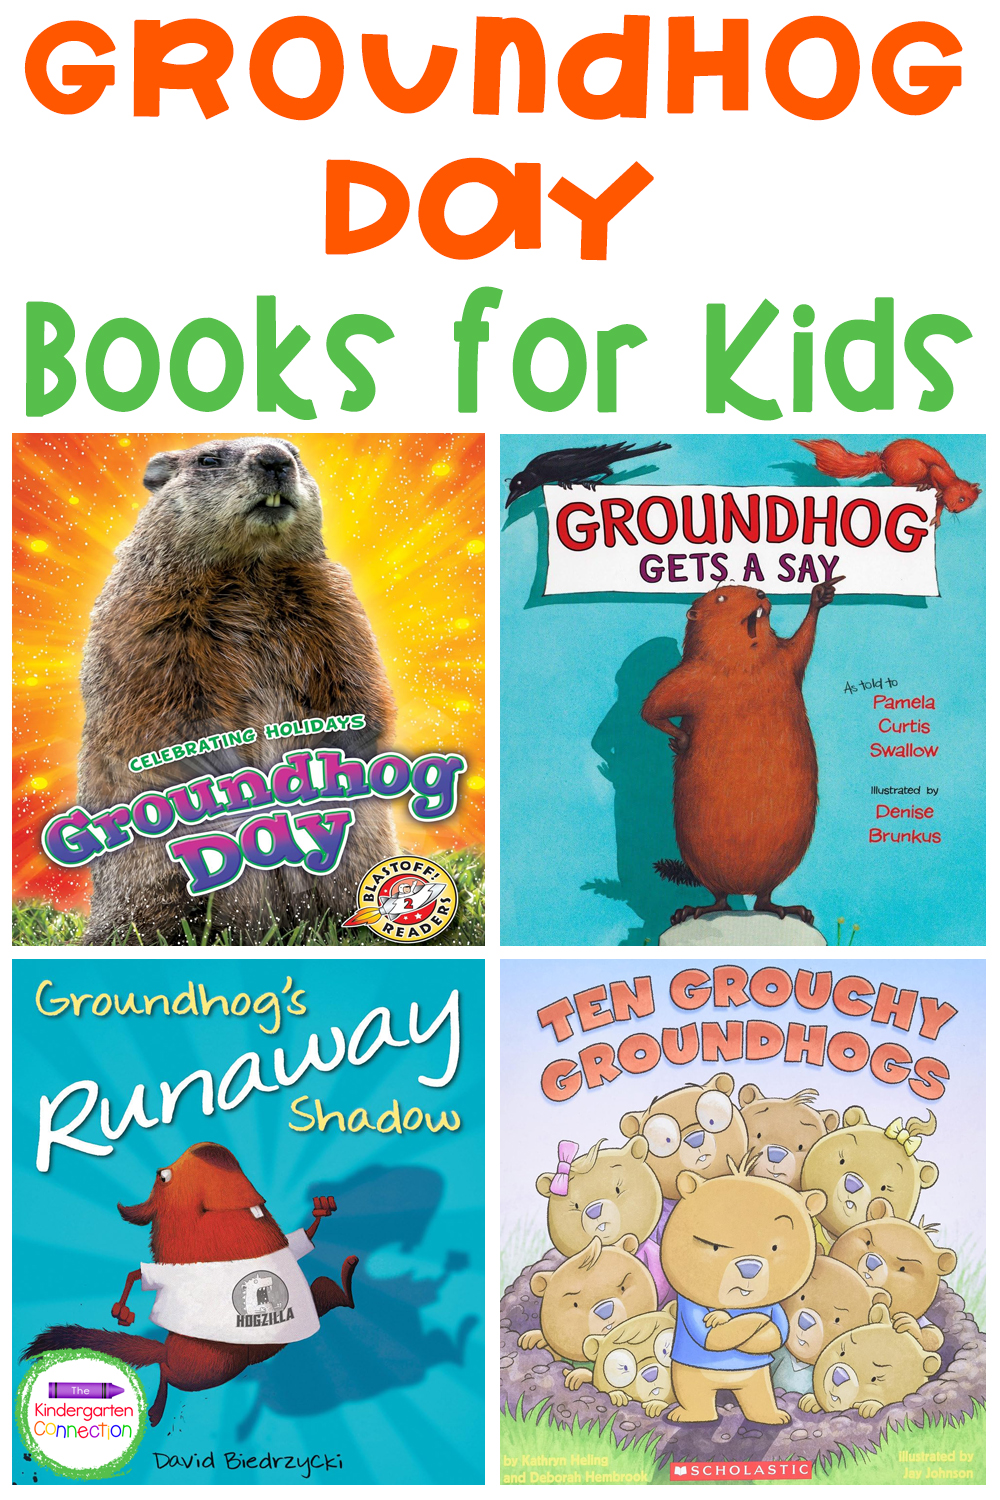 These Groundhog Day Books for Kids include counting fun, groundhog facts, and exciting adventures!